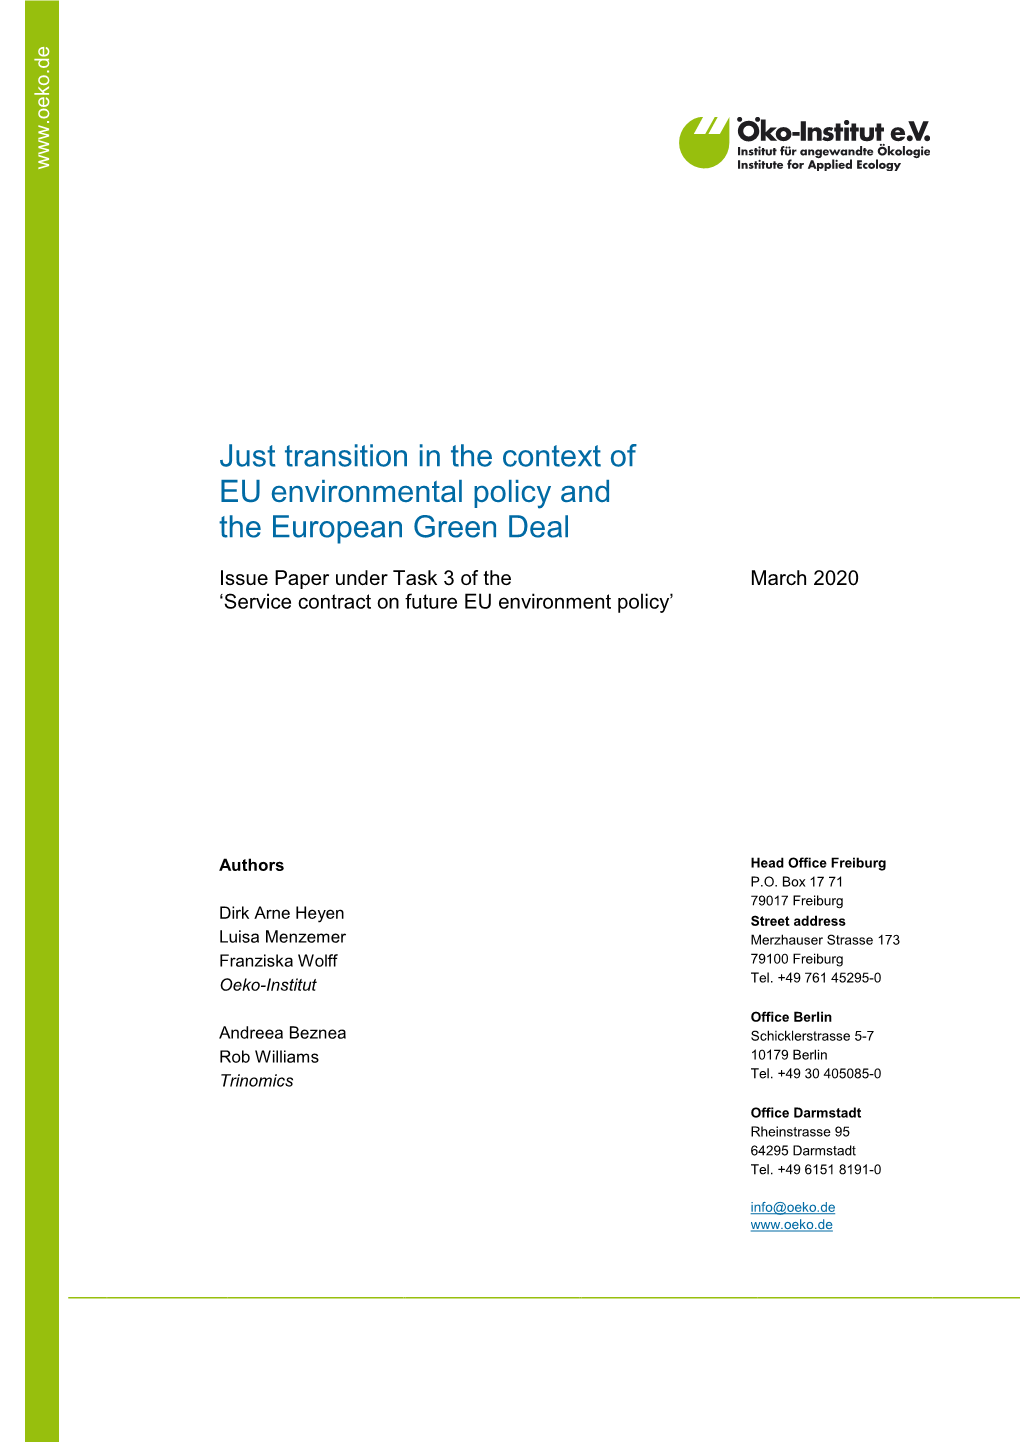 Just Transition in the Context of EU Environmental Policy and the European Green Deal